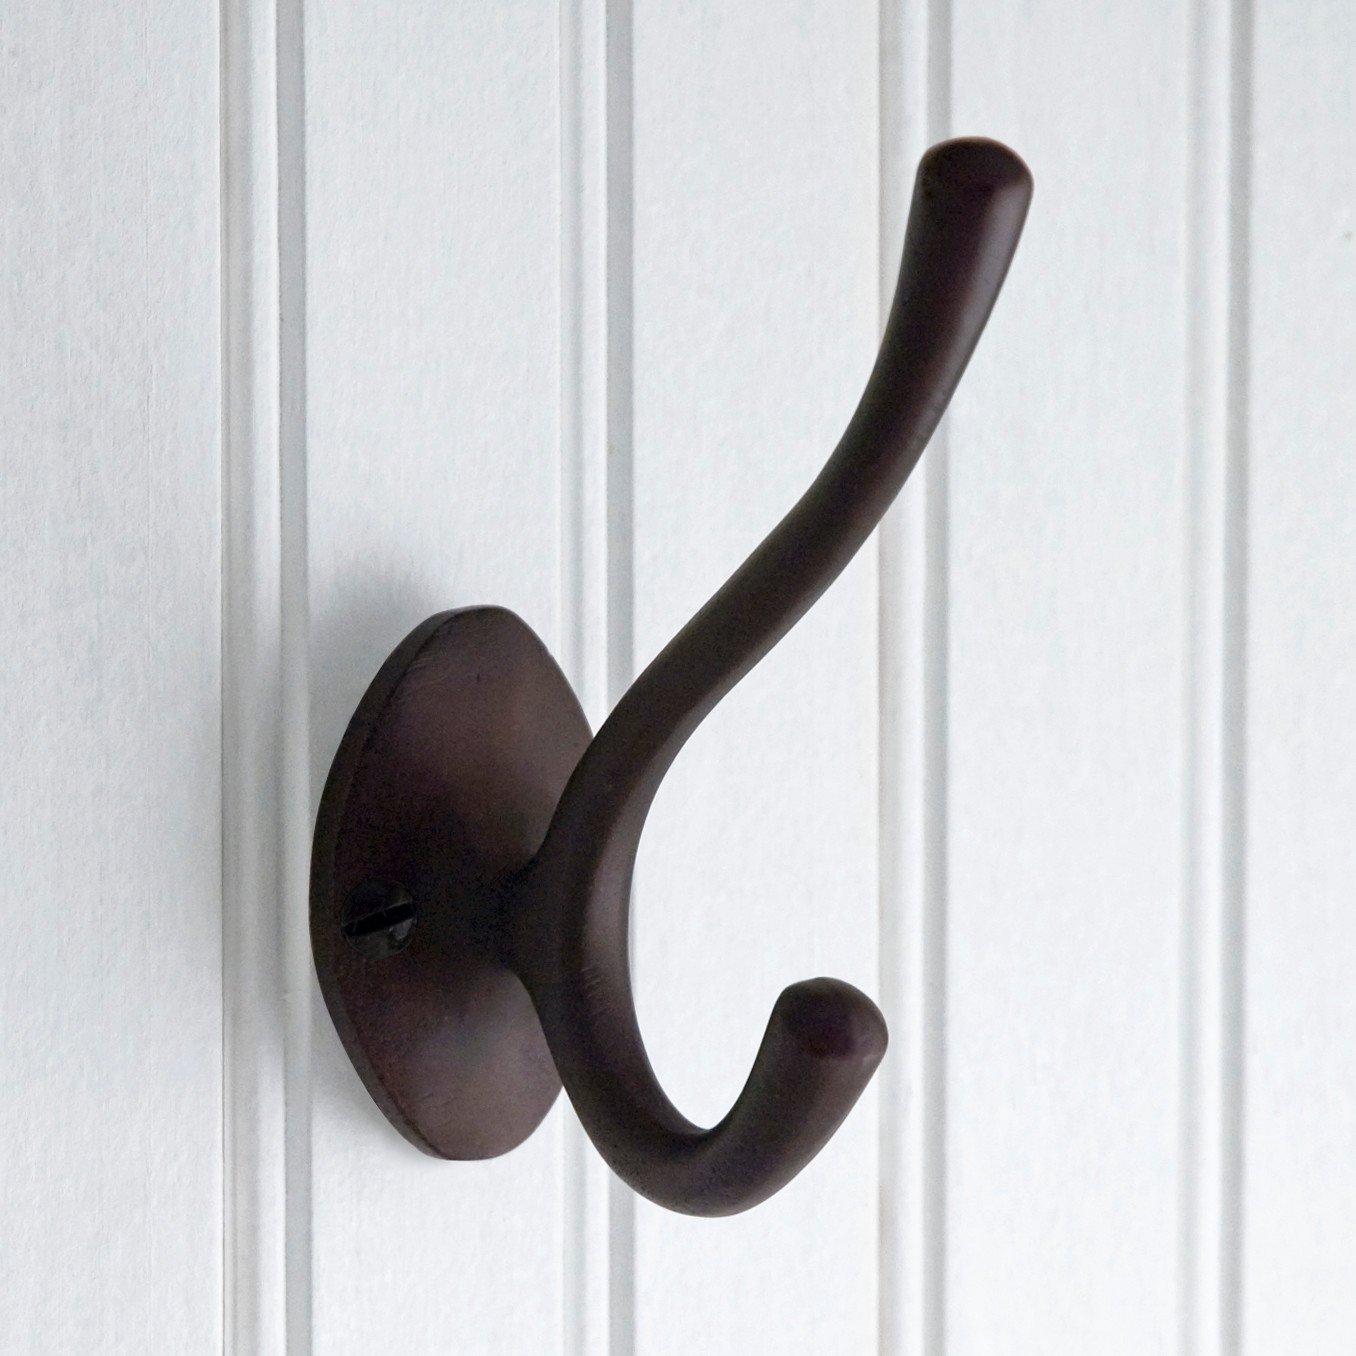 55mm x 53mm Vintage Style Wall Mounted Clothes Hat Double Hook Hanger 10PCS  - Bronze Tone - Bed Bath & Beyond - 35391857